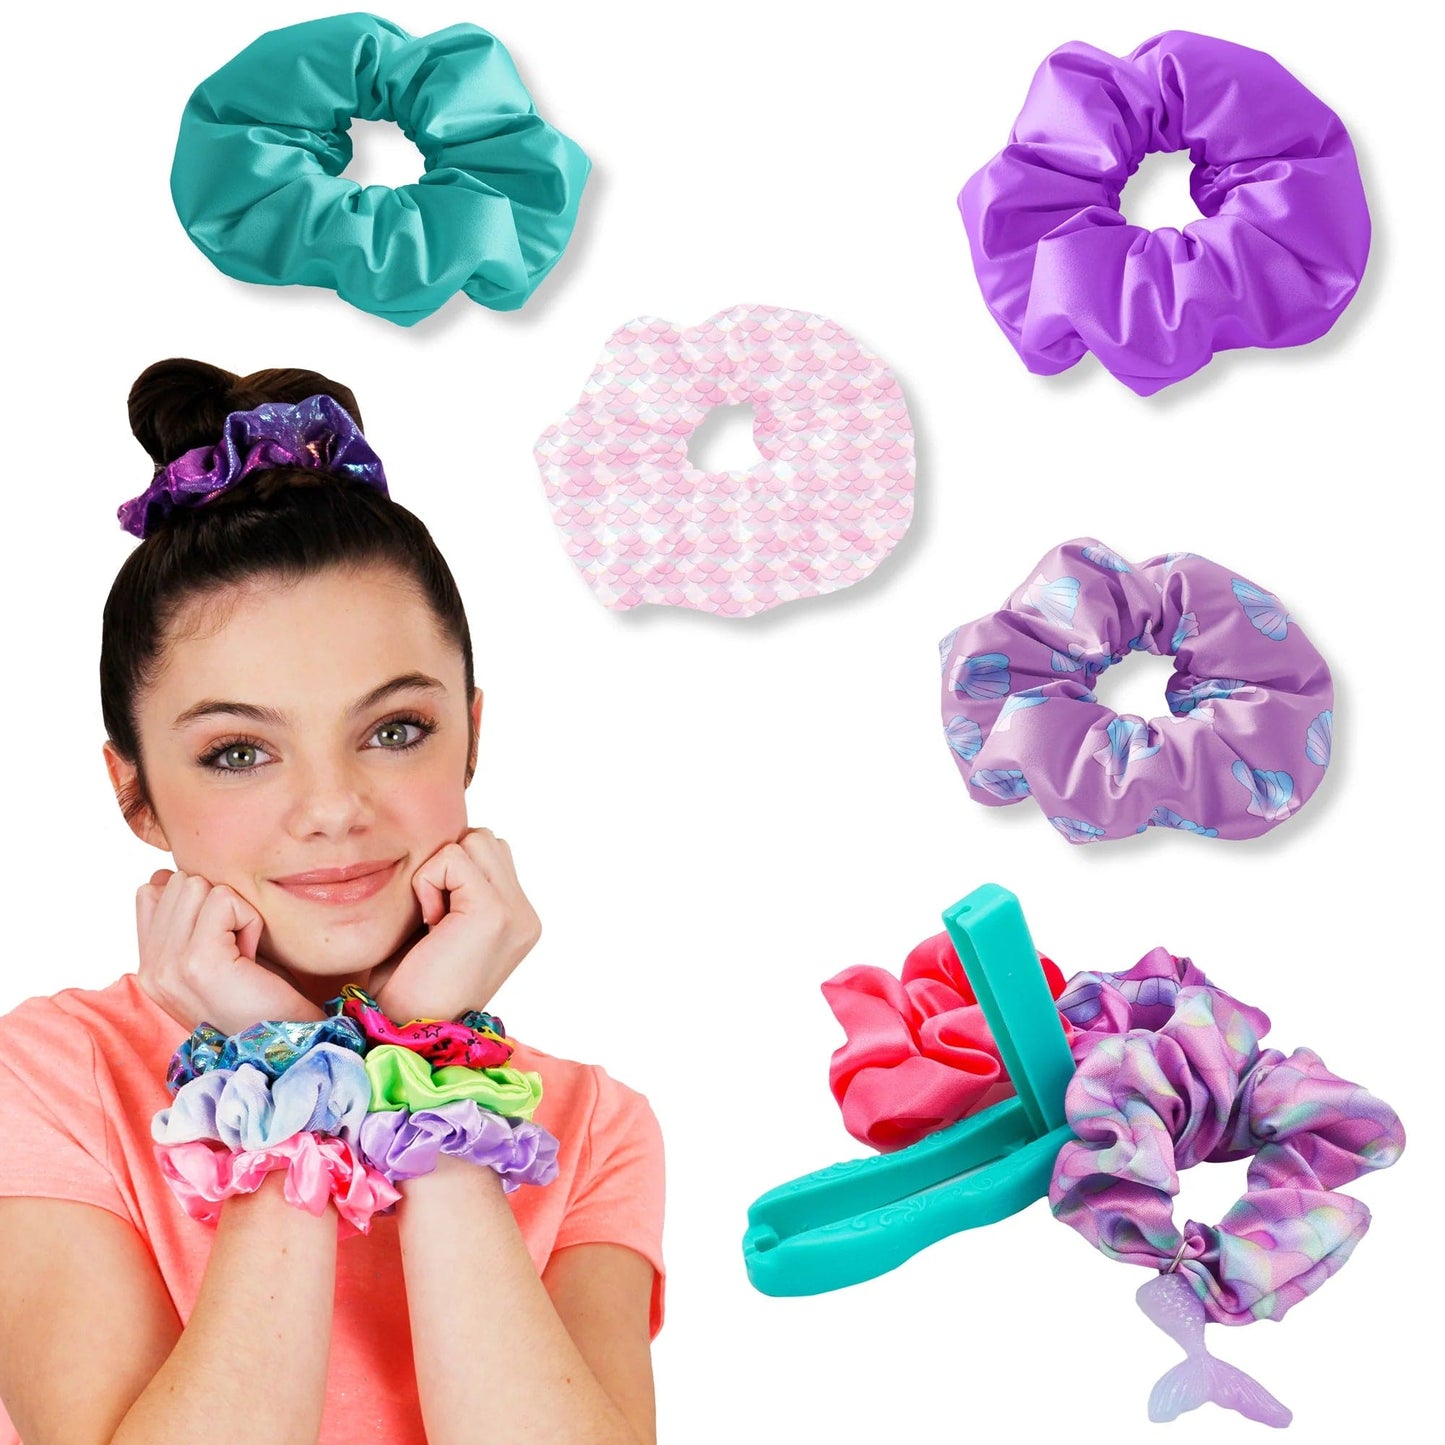 We Cool Jewelry Making Kits Schrunchie Loom DIY Kit